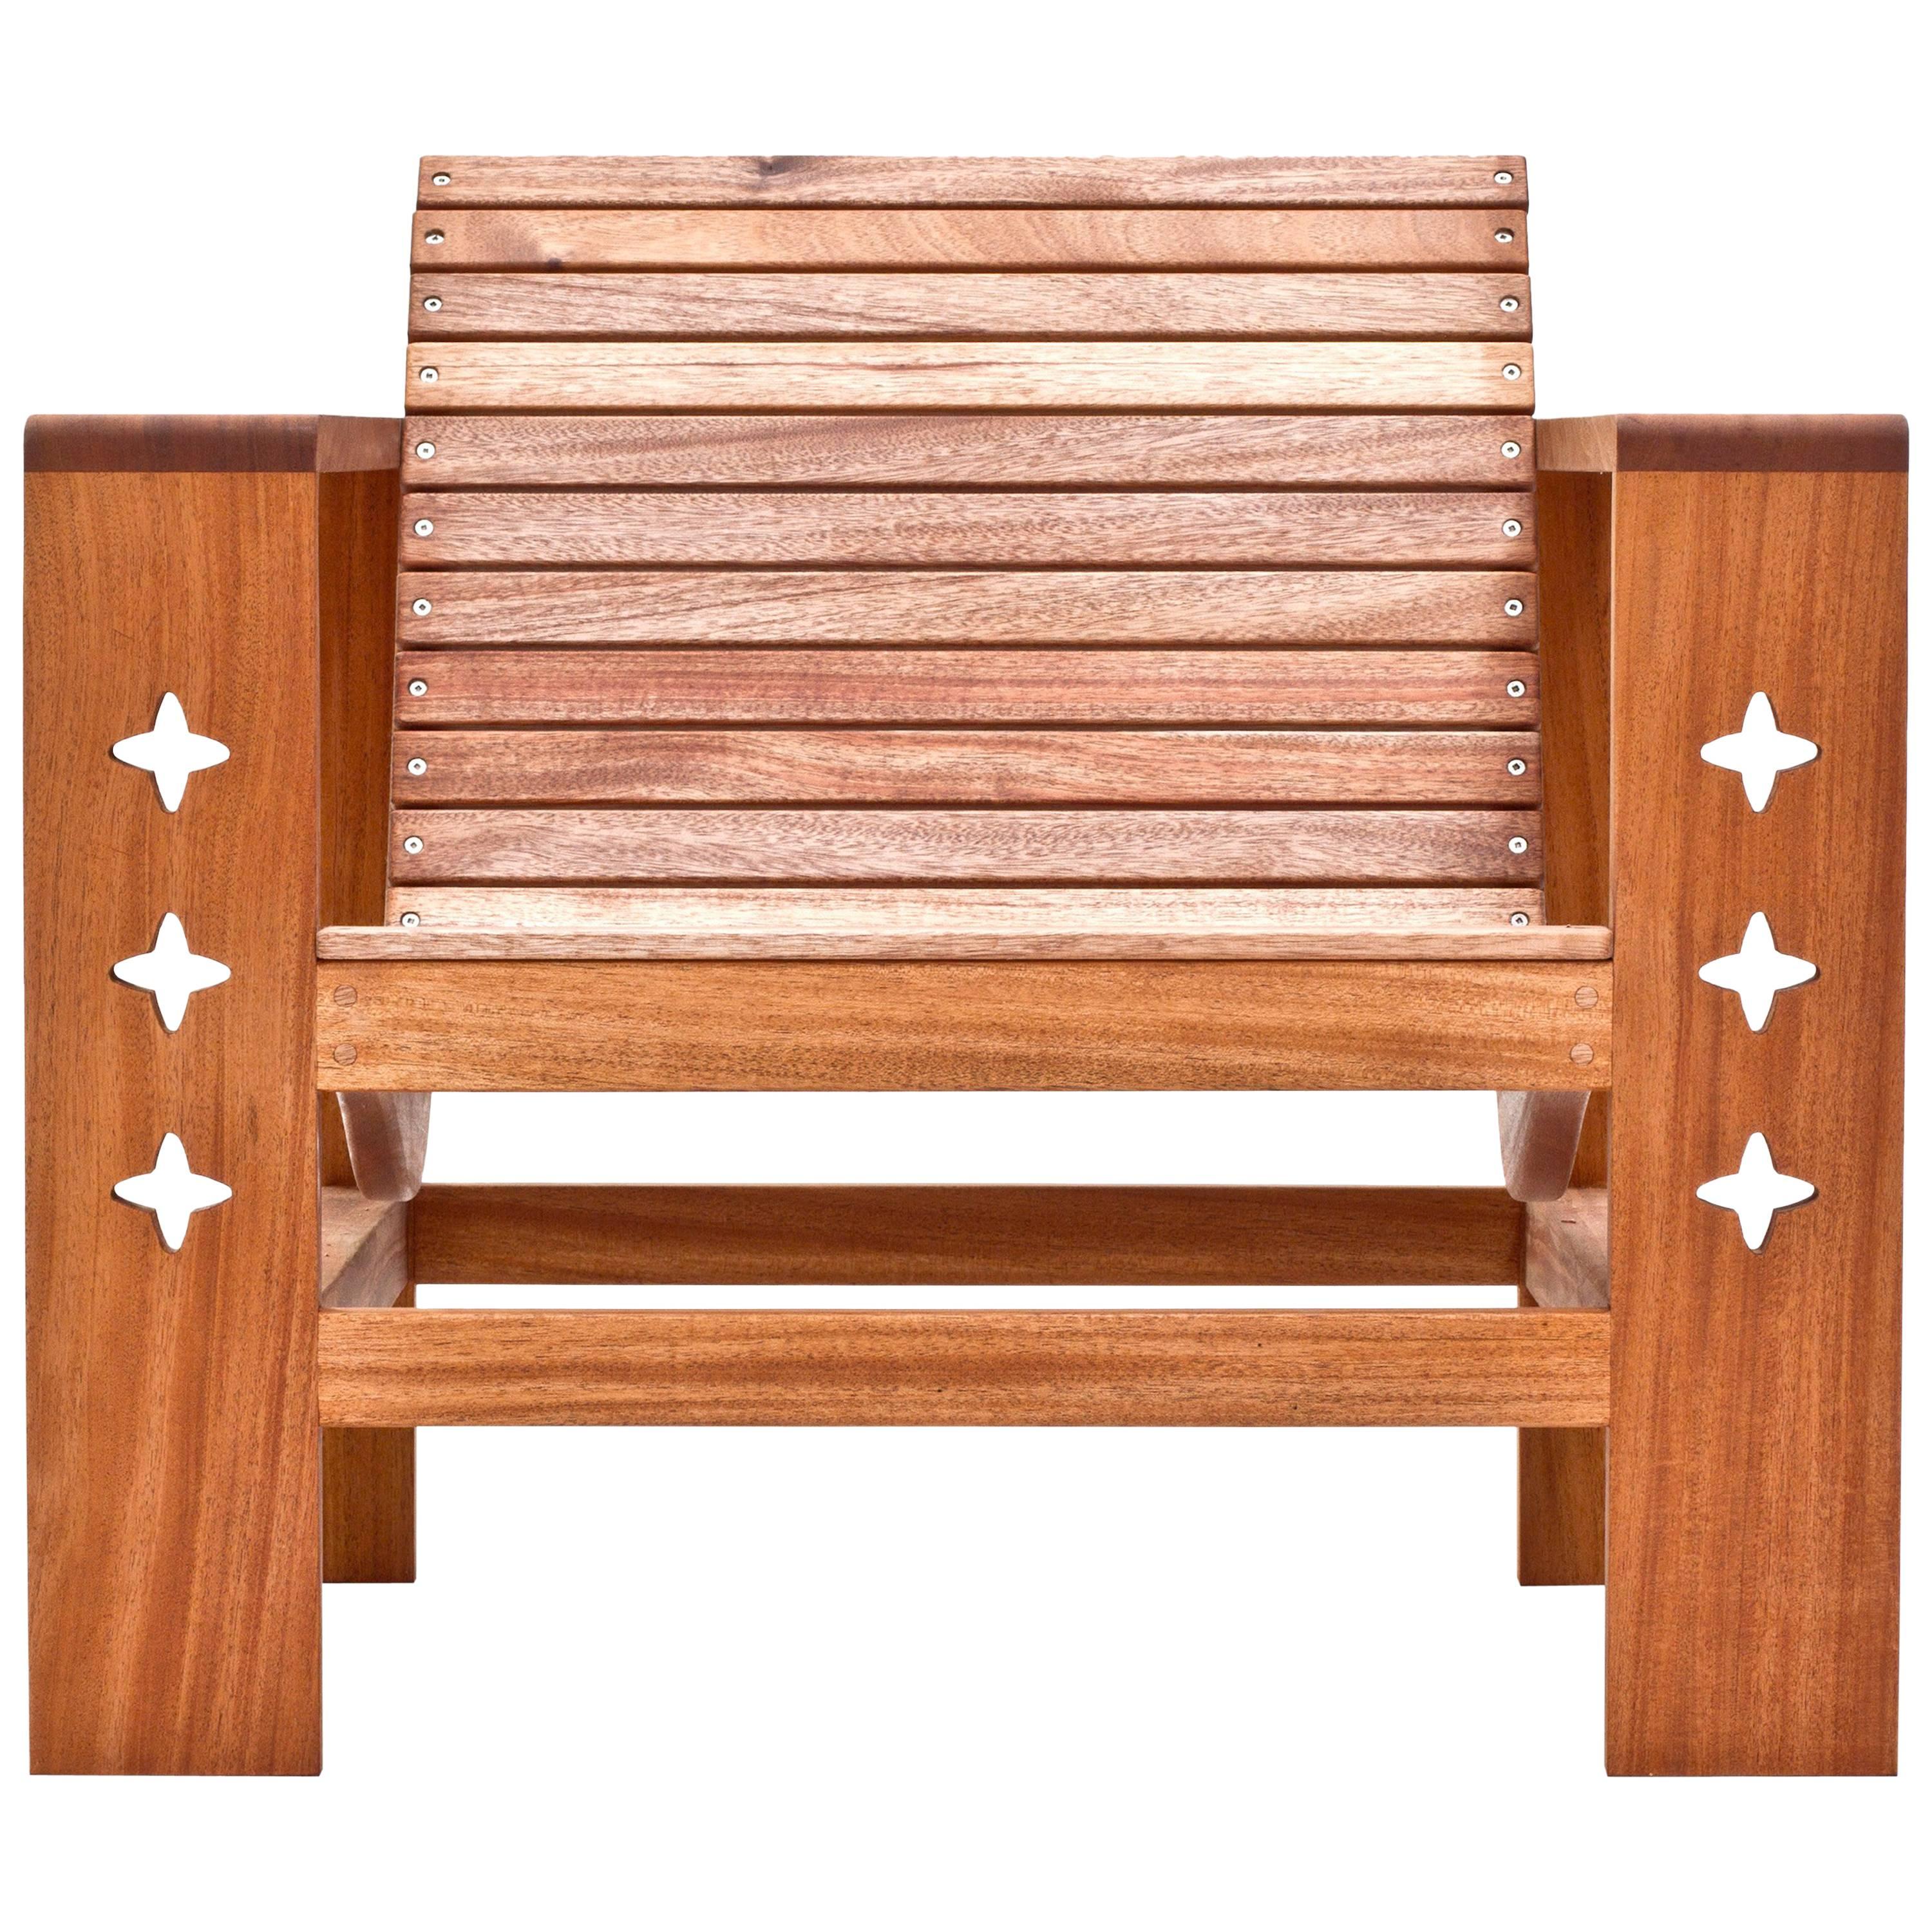 Uti 'Ooh-Tee' Lounge Chair in Mahogany with Natural Finish, Wooda Original For Sale